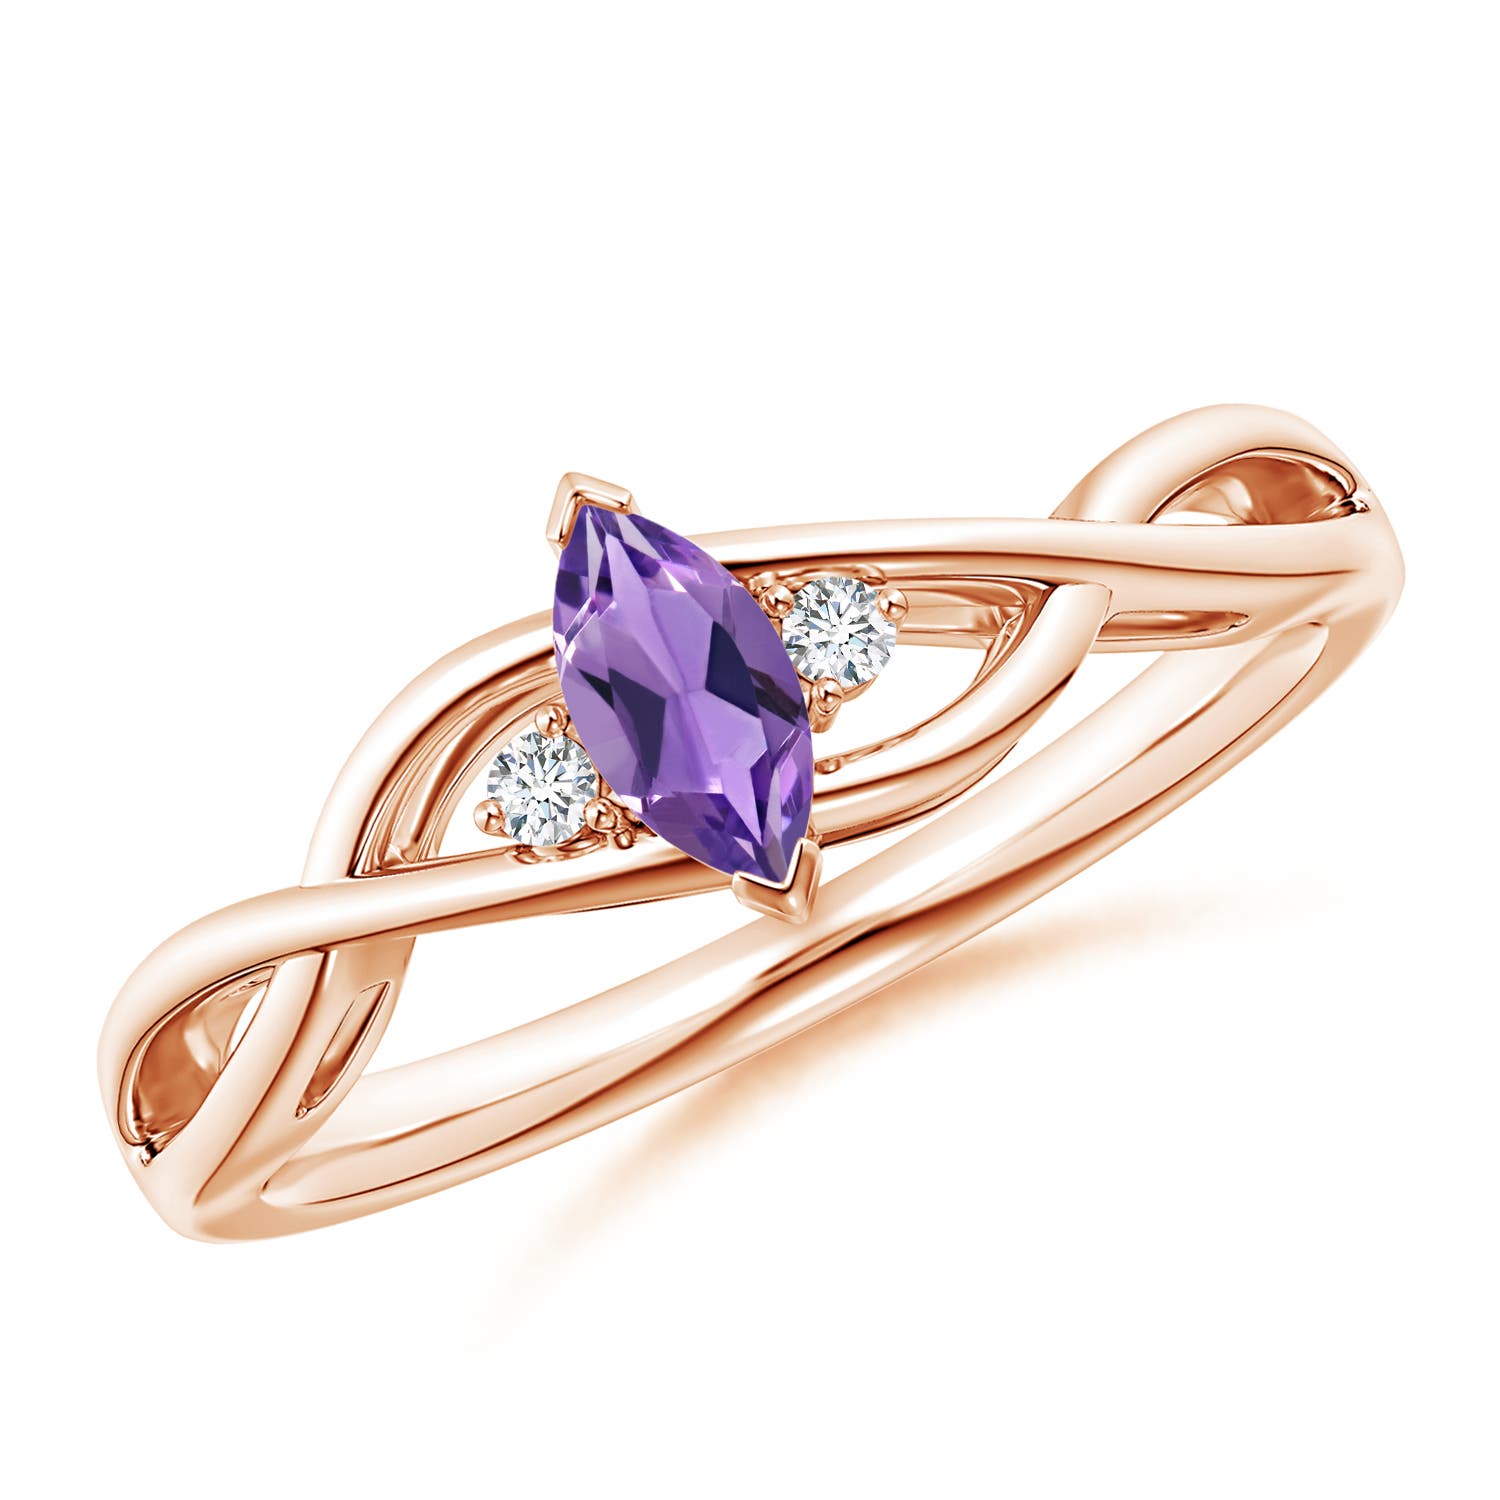 AA - Amethyst / 0.23 CT / 14 KT Rose Gold